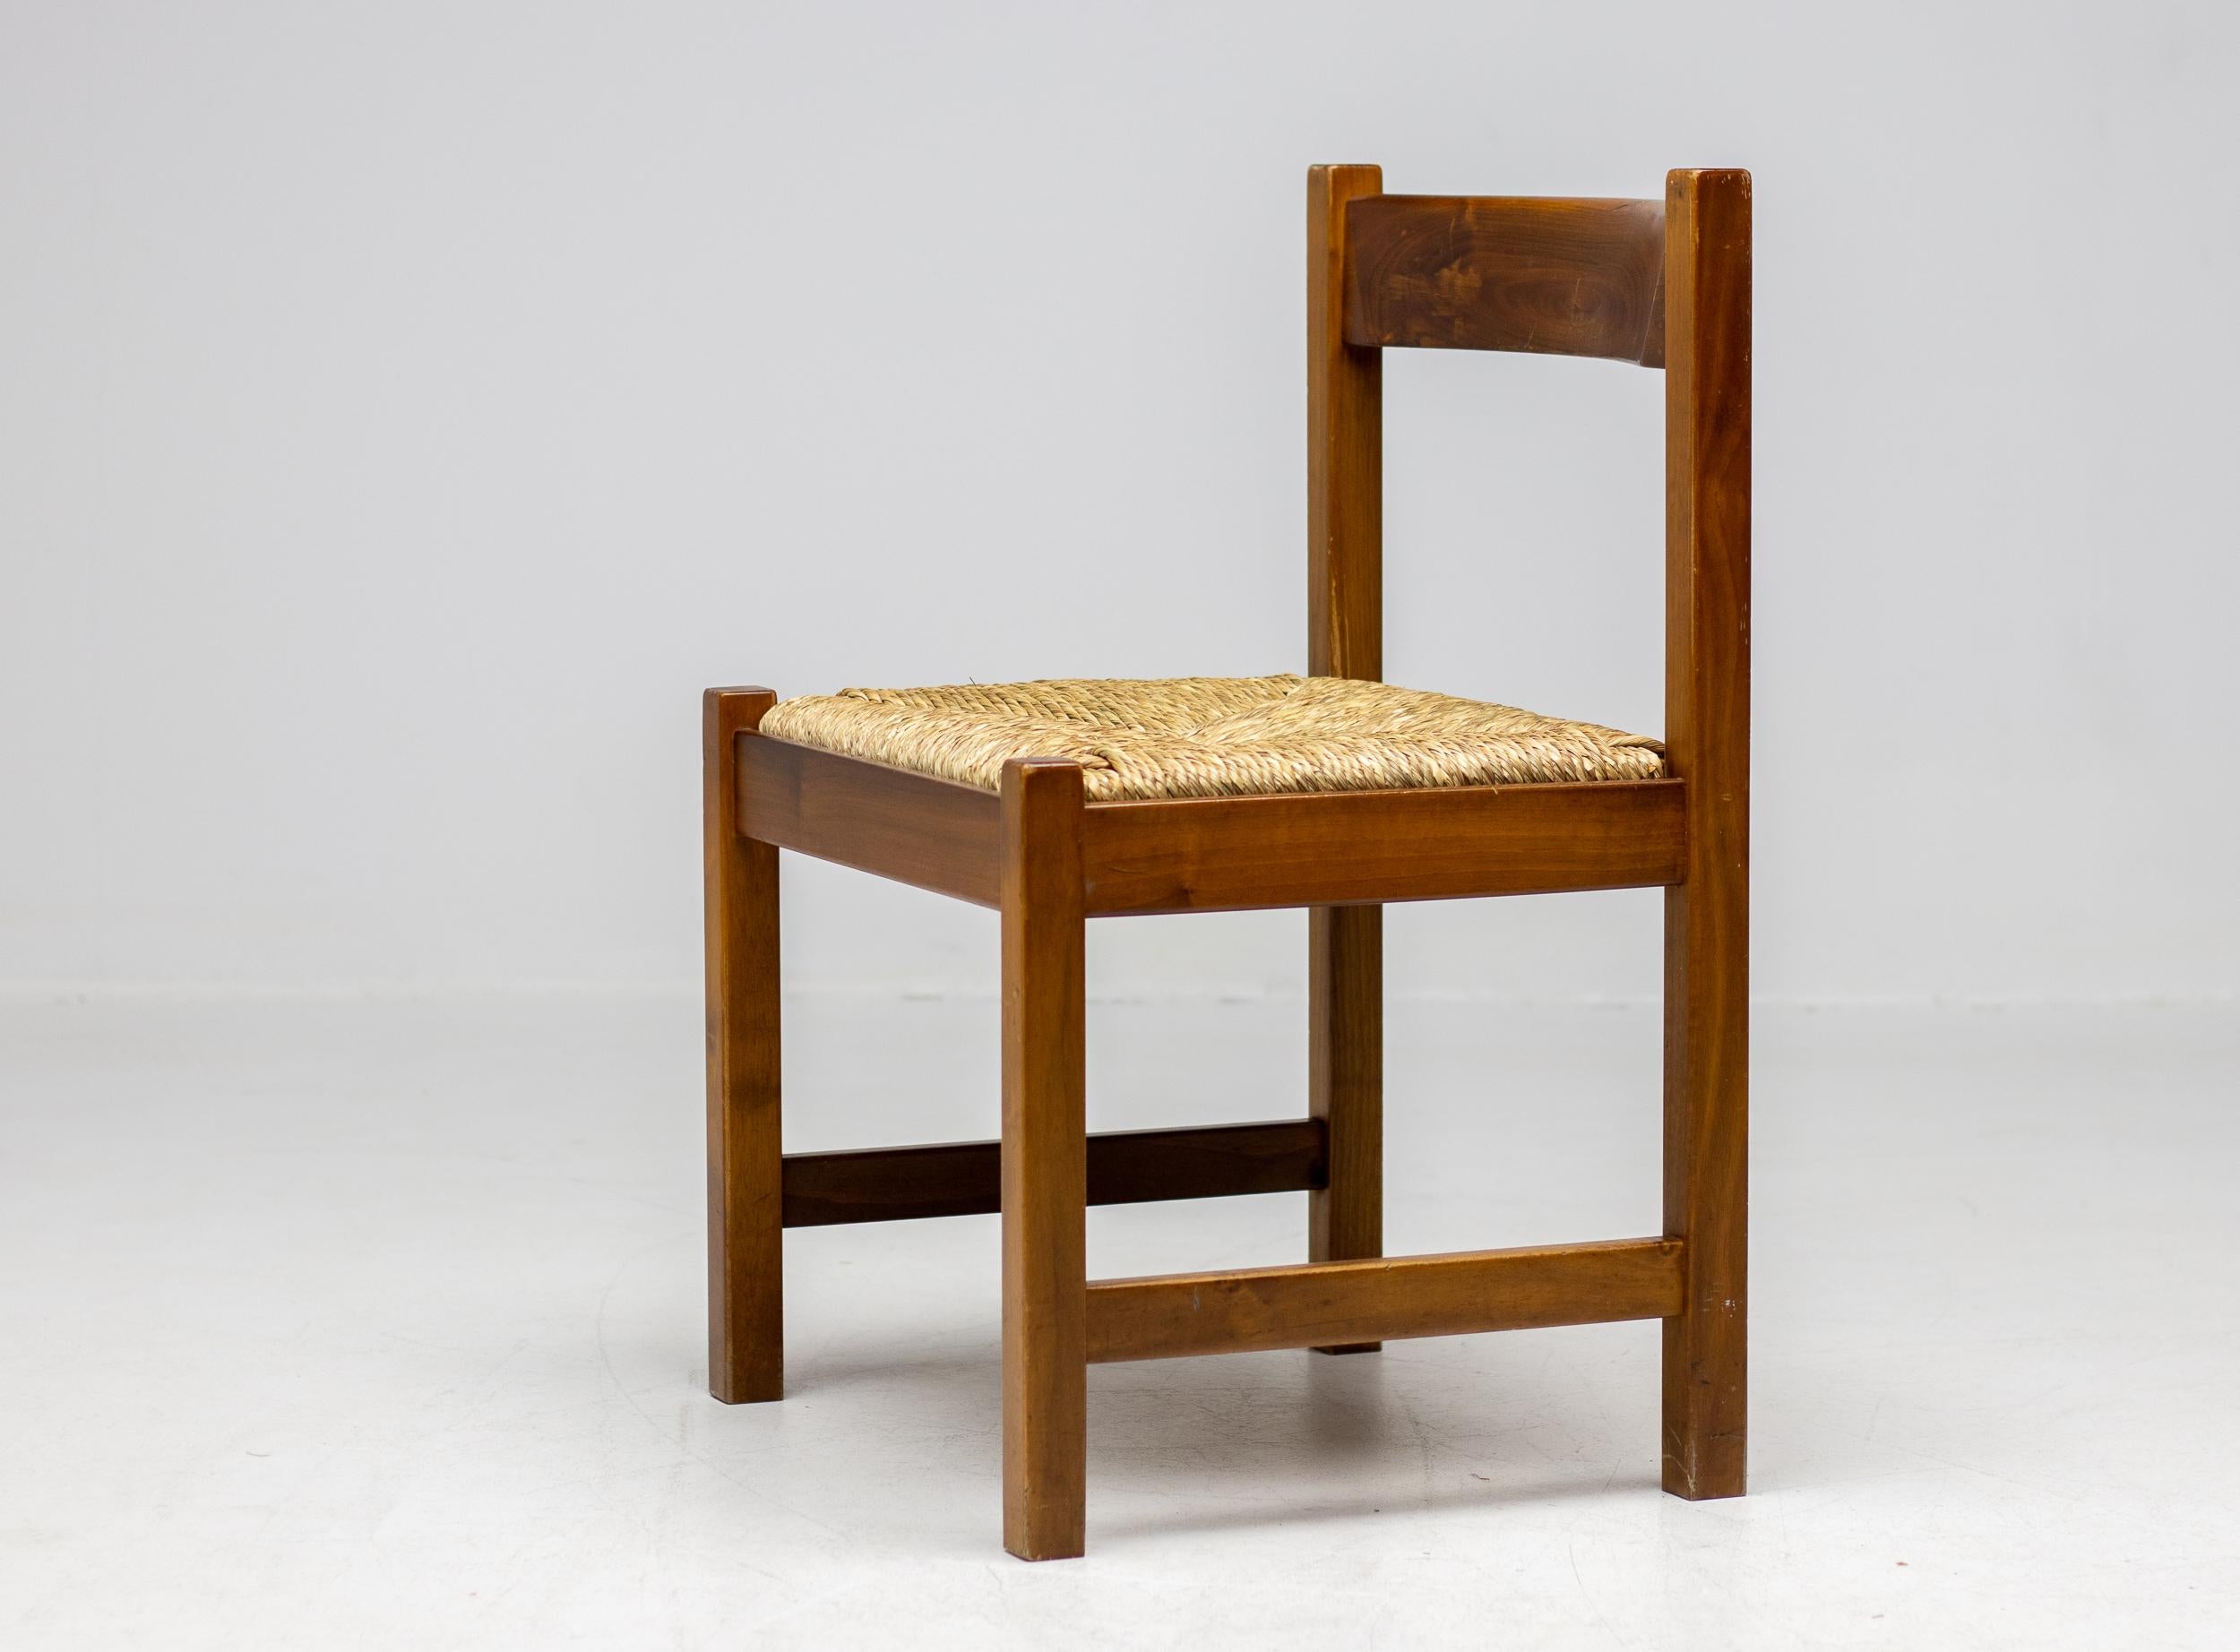 Set of 4 dining chairs from the Torbecchia series, designed by brutalist architect Giovanni Michelucci for Poltronova, 1964. 
Solid walnut structure with seats upholstered in cane. 
This architectural set will enlighten your interior through its